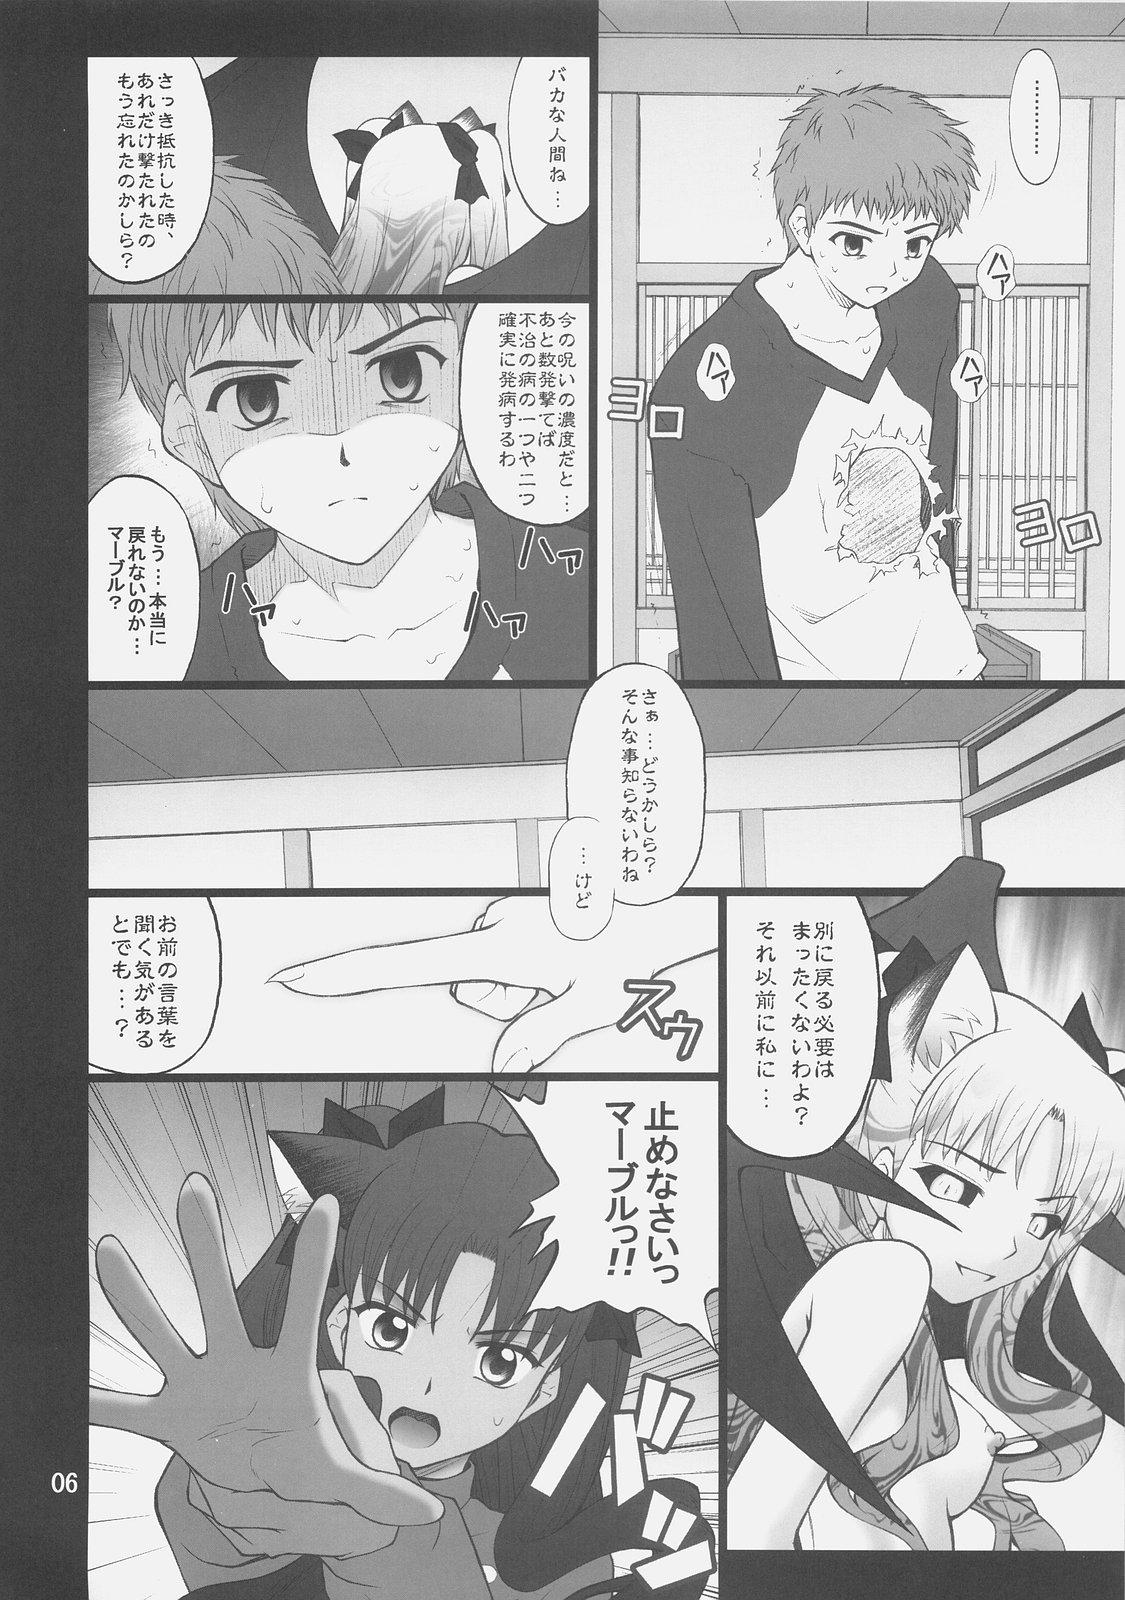 Teen Sex Grem-Rin 4 - Fate stay night Fate hollow ataraxia Fisting - Page 5